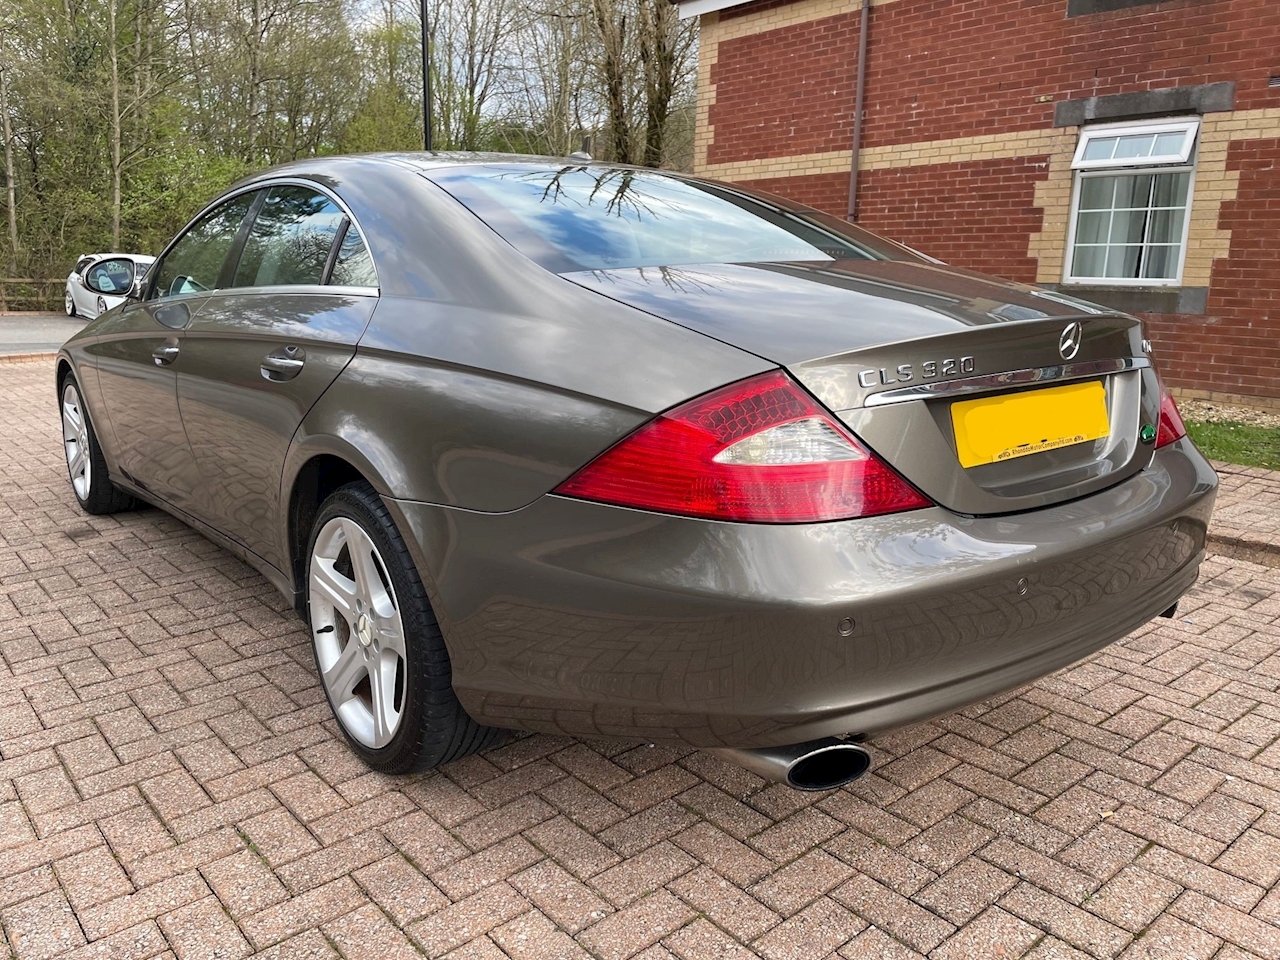 3.0 CLS320 CDI Coupe 4dr Diesel 7G-Tronic (200 g/km, 221 bhp)